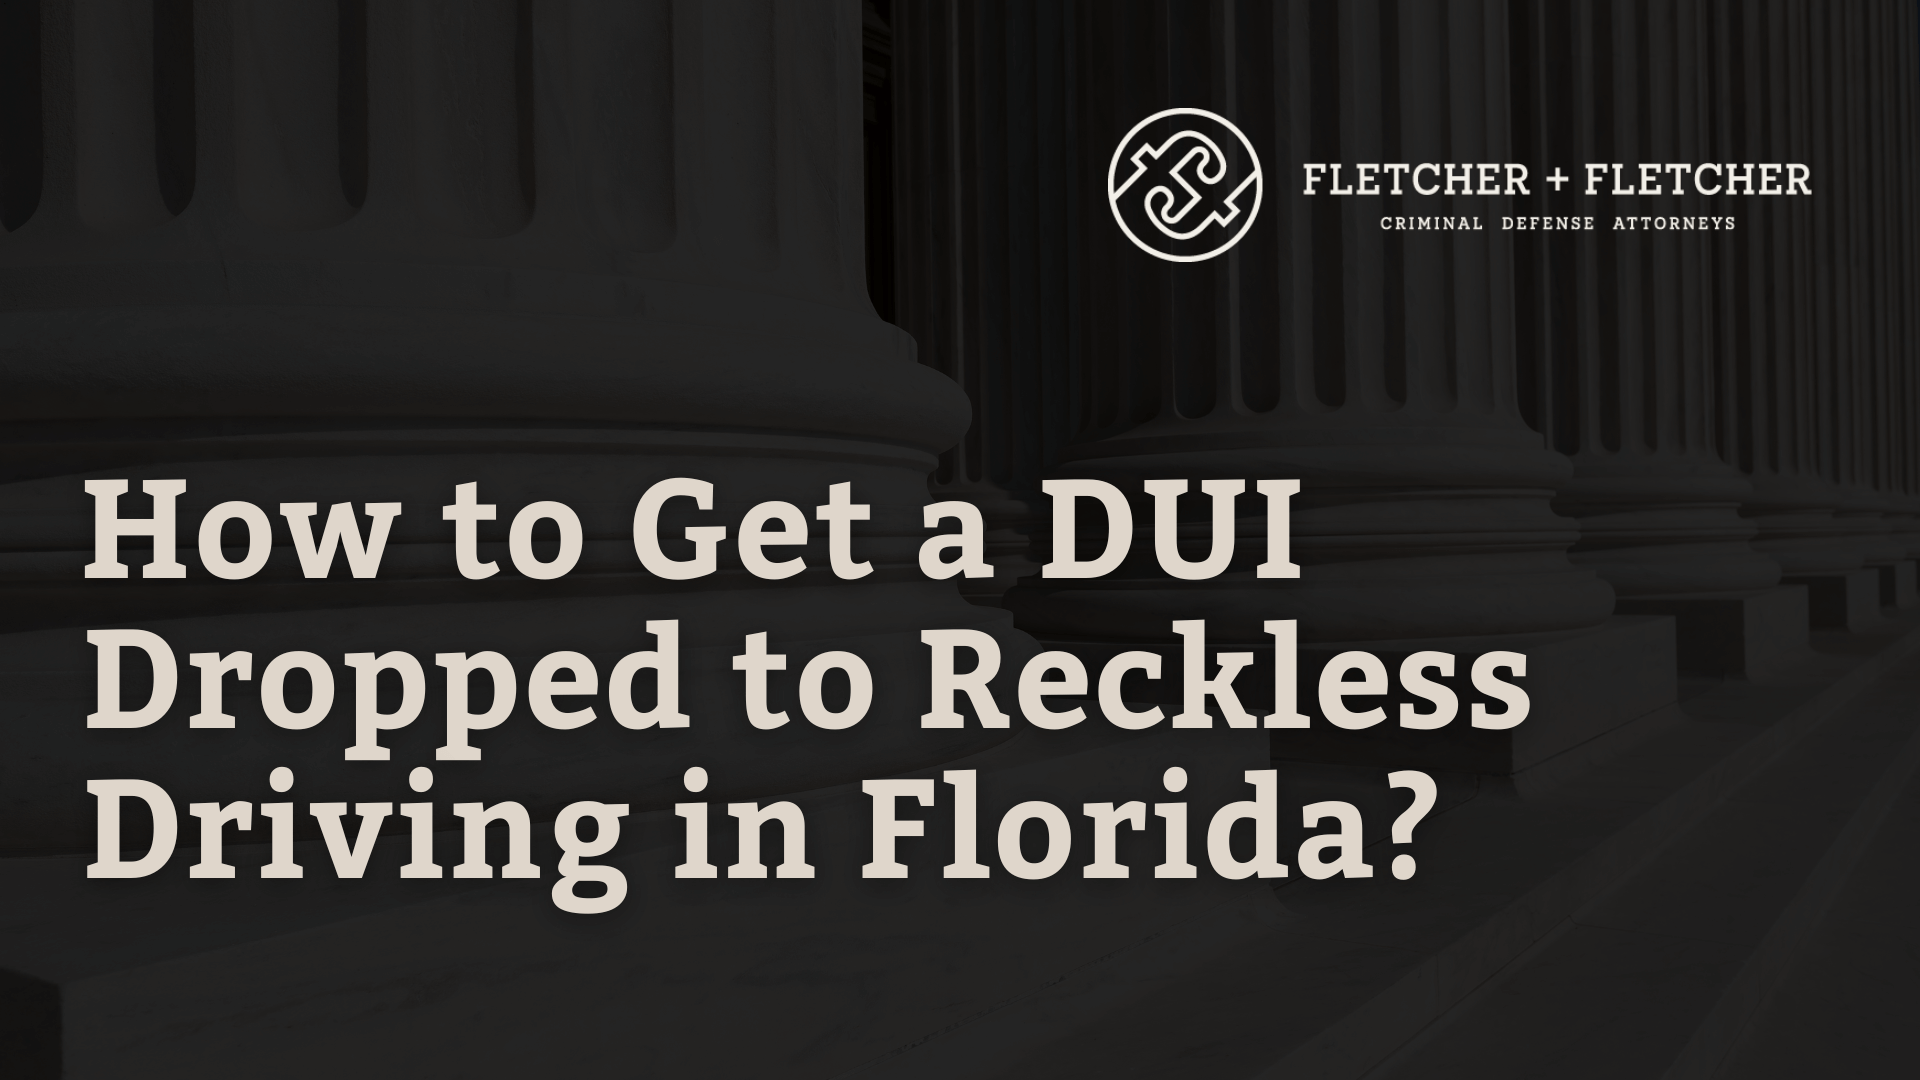 How to Get a DUI Dropped to Reckless Driving in Florida?